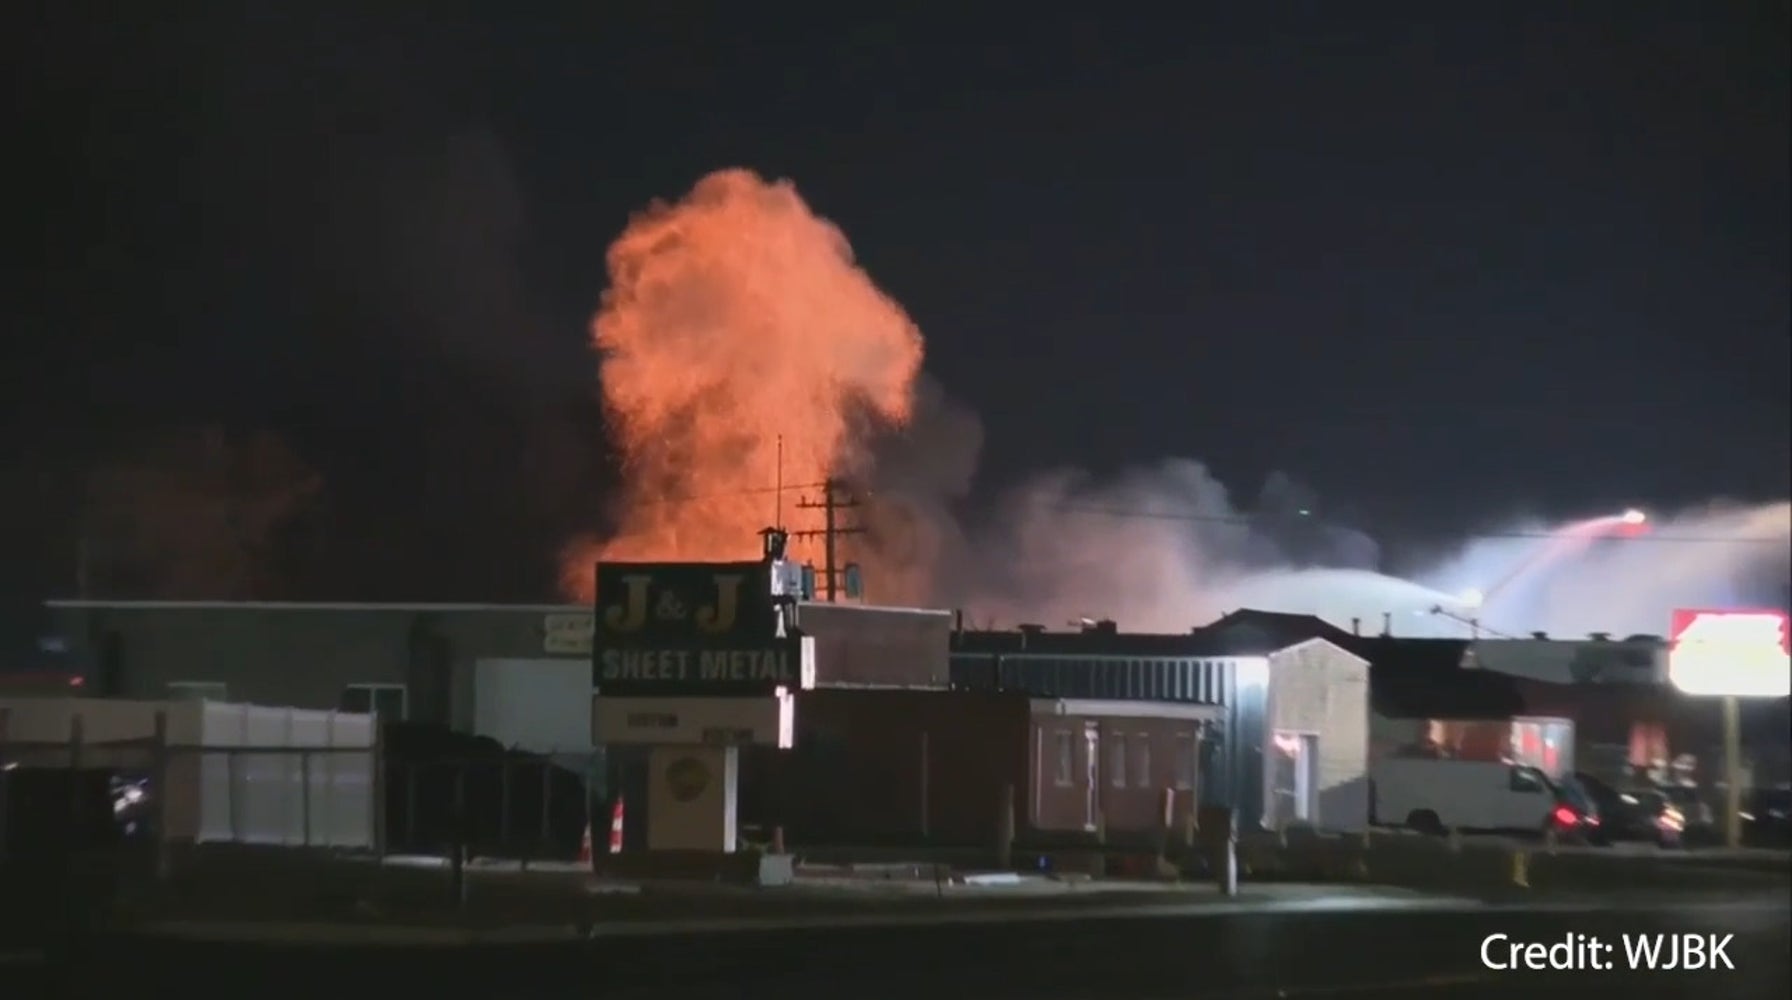 Deadly Industrial Fire Sparks Hundreds of Explosions, Killing Teenager